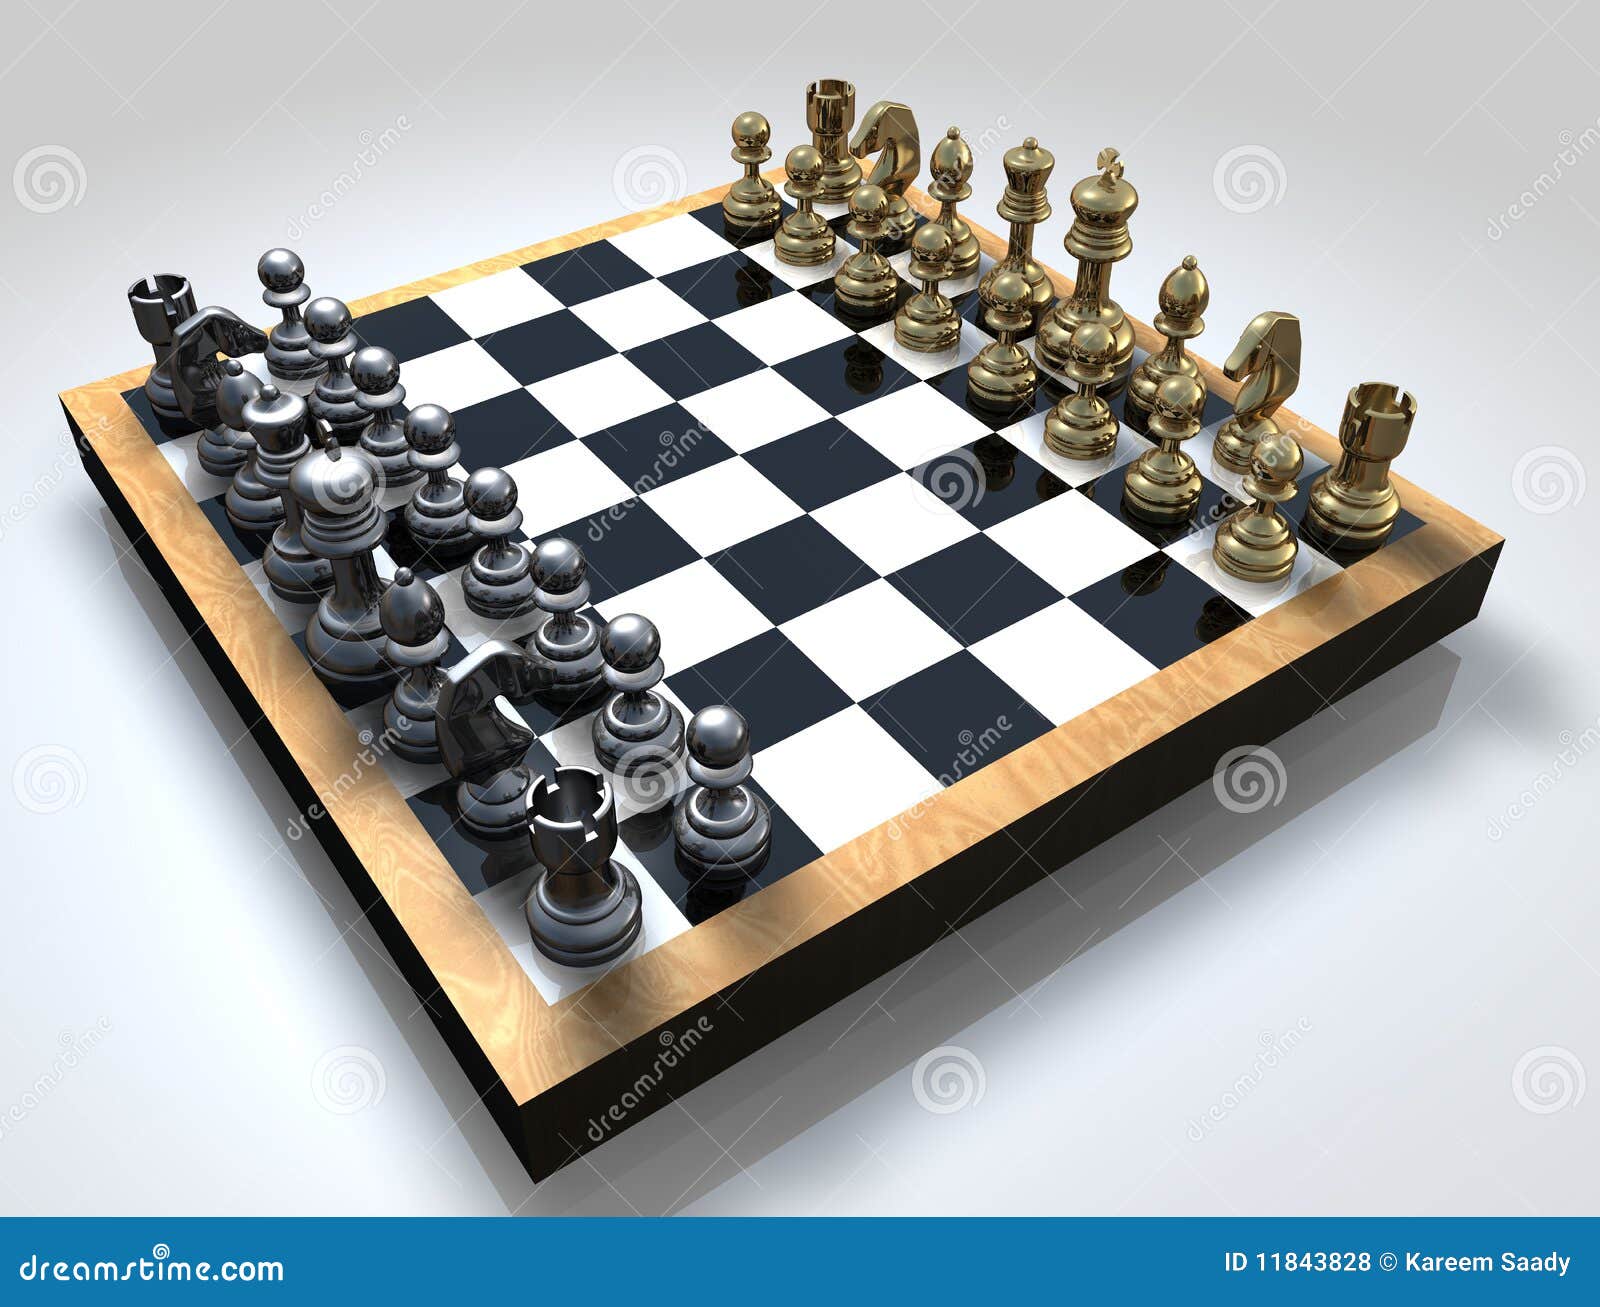 3d Chessboard And Wooden Background Stock Photos and Images - 123RF